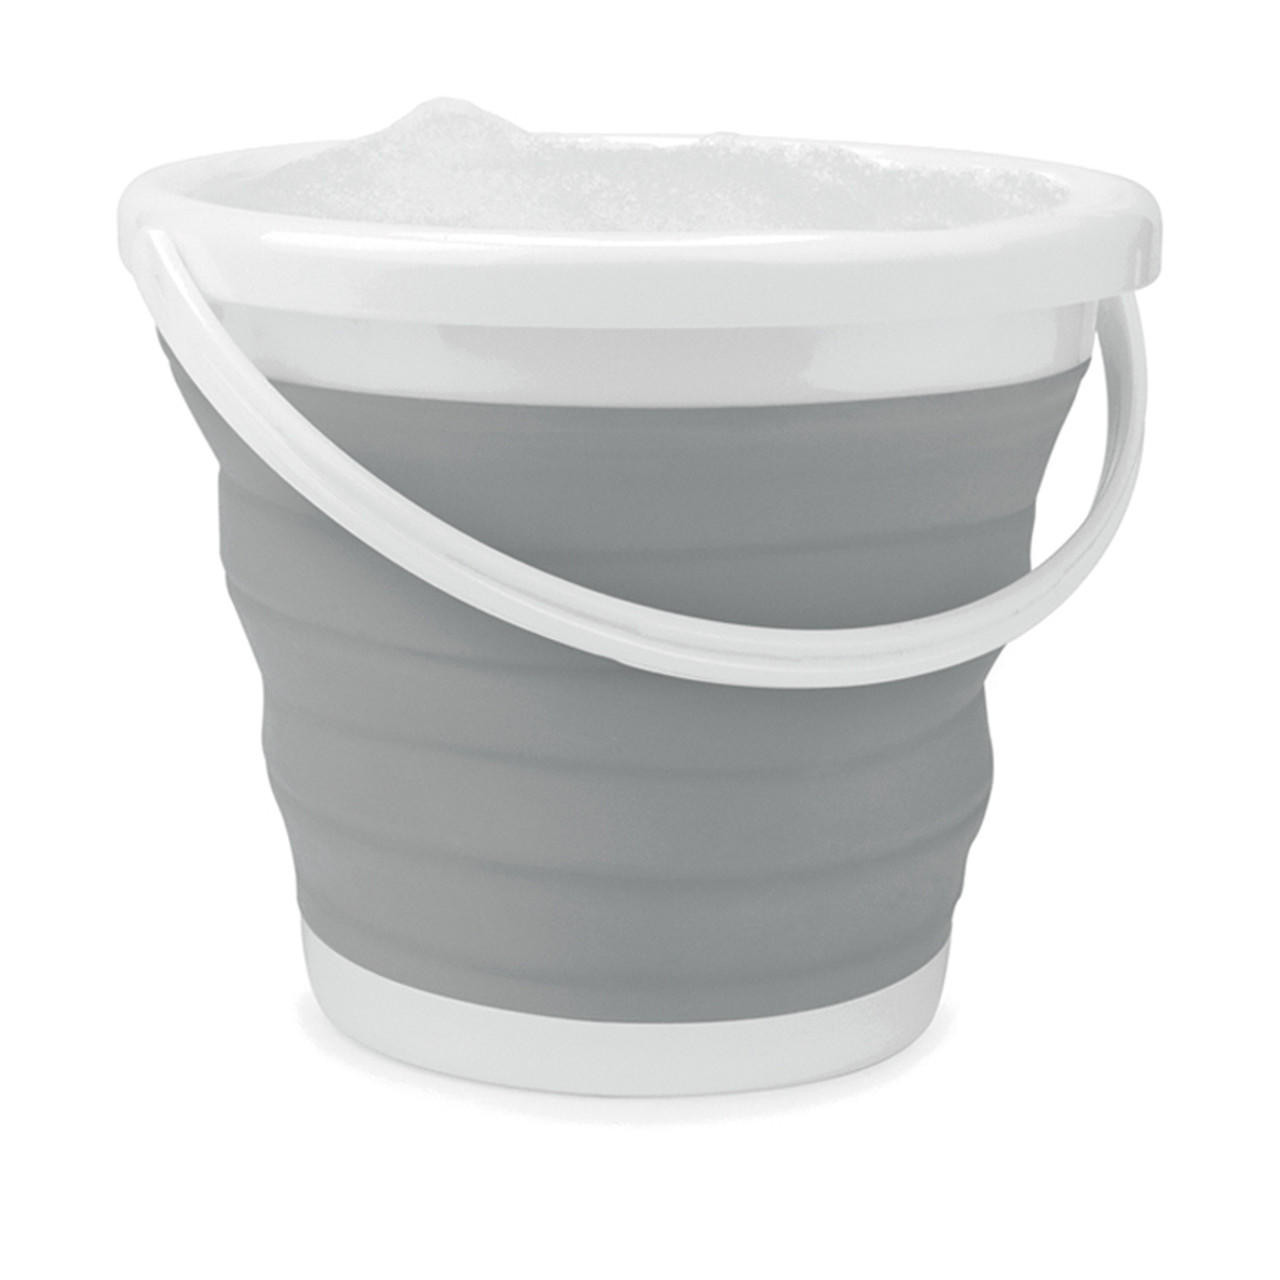 Beldray 10L Grey Collapsible Folding Bucket